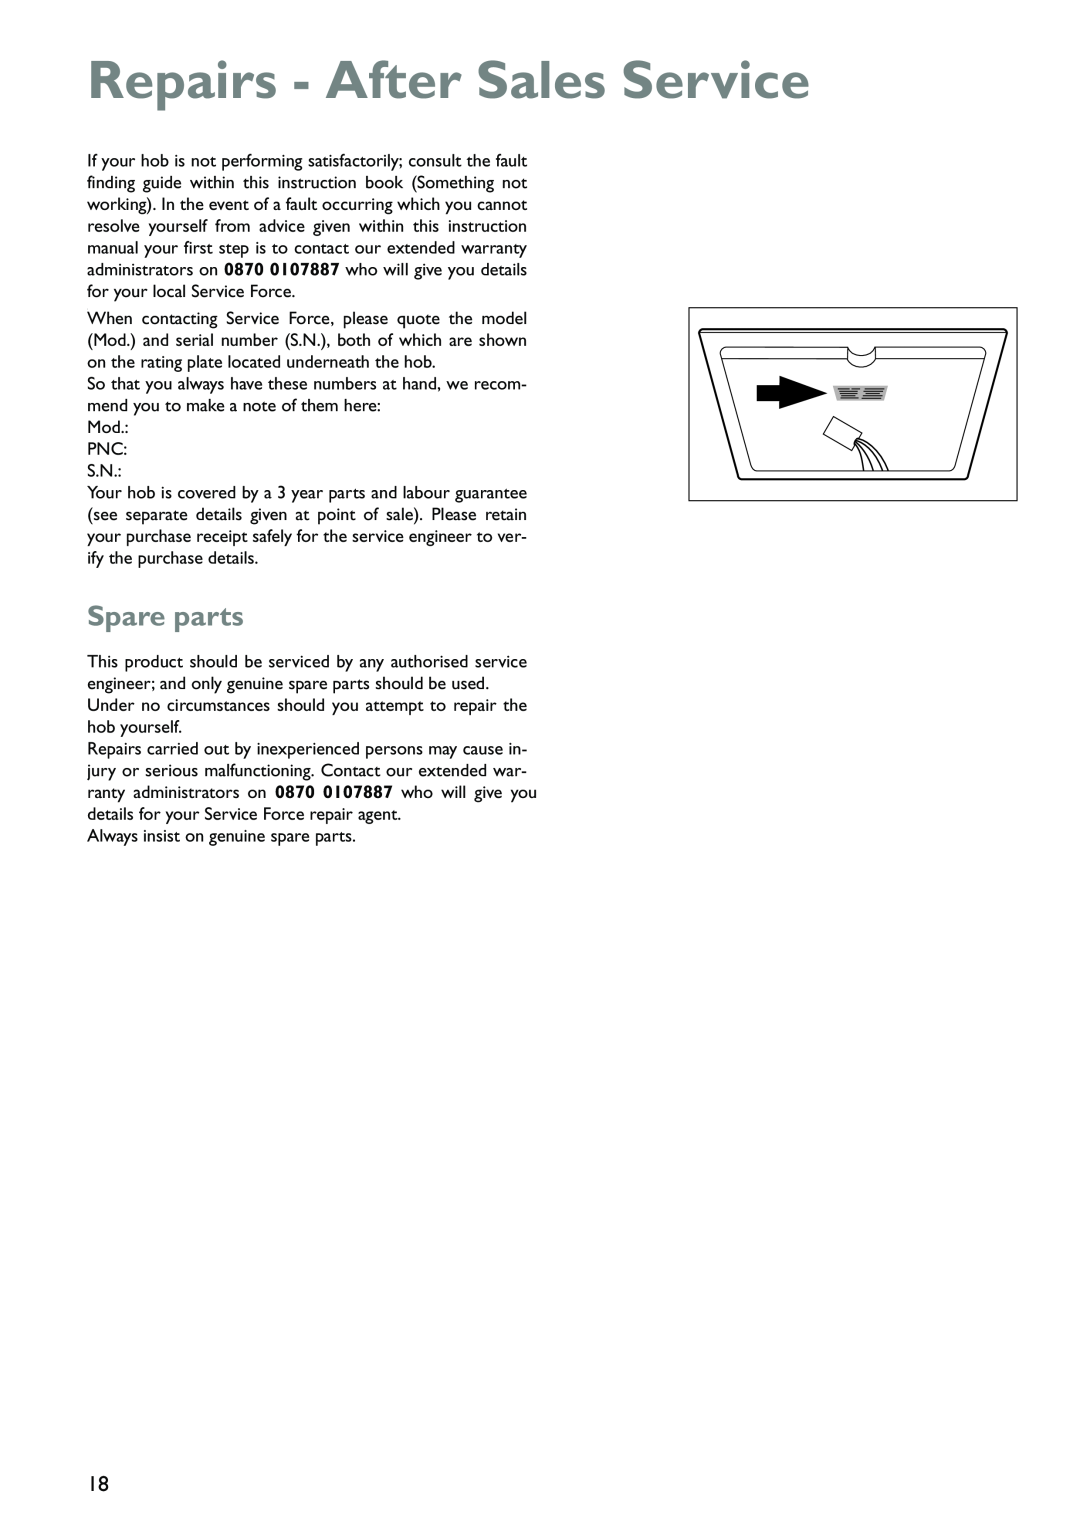 John Lewis JLBICH602 instruction manual Repairs - After Sales Service, Spare parts 